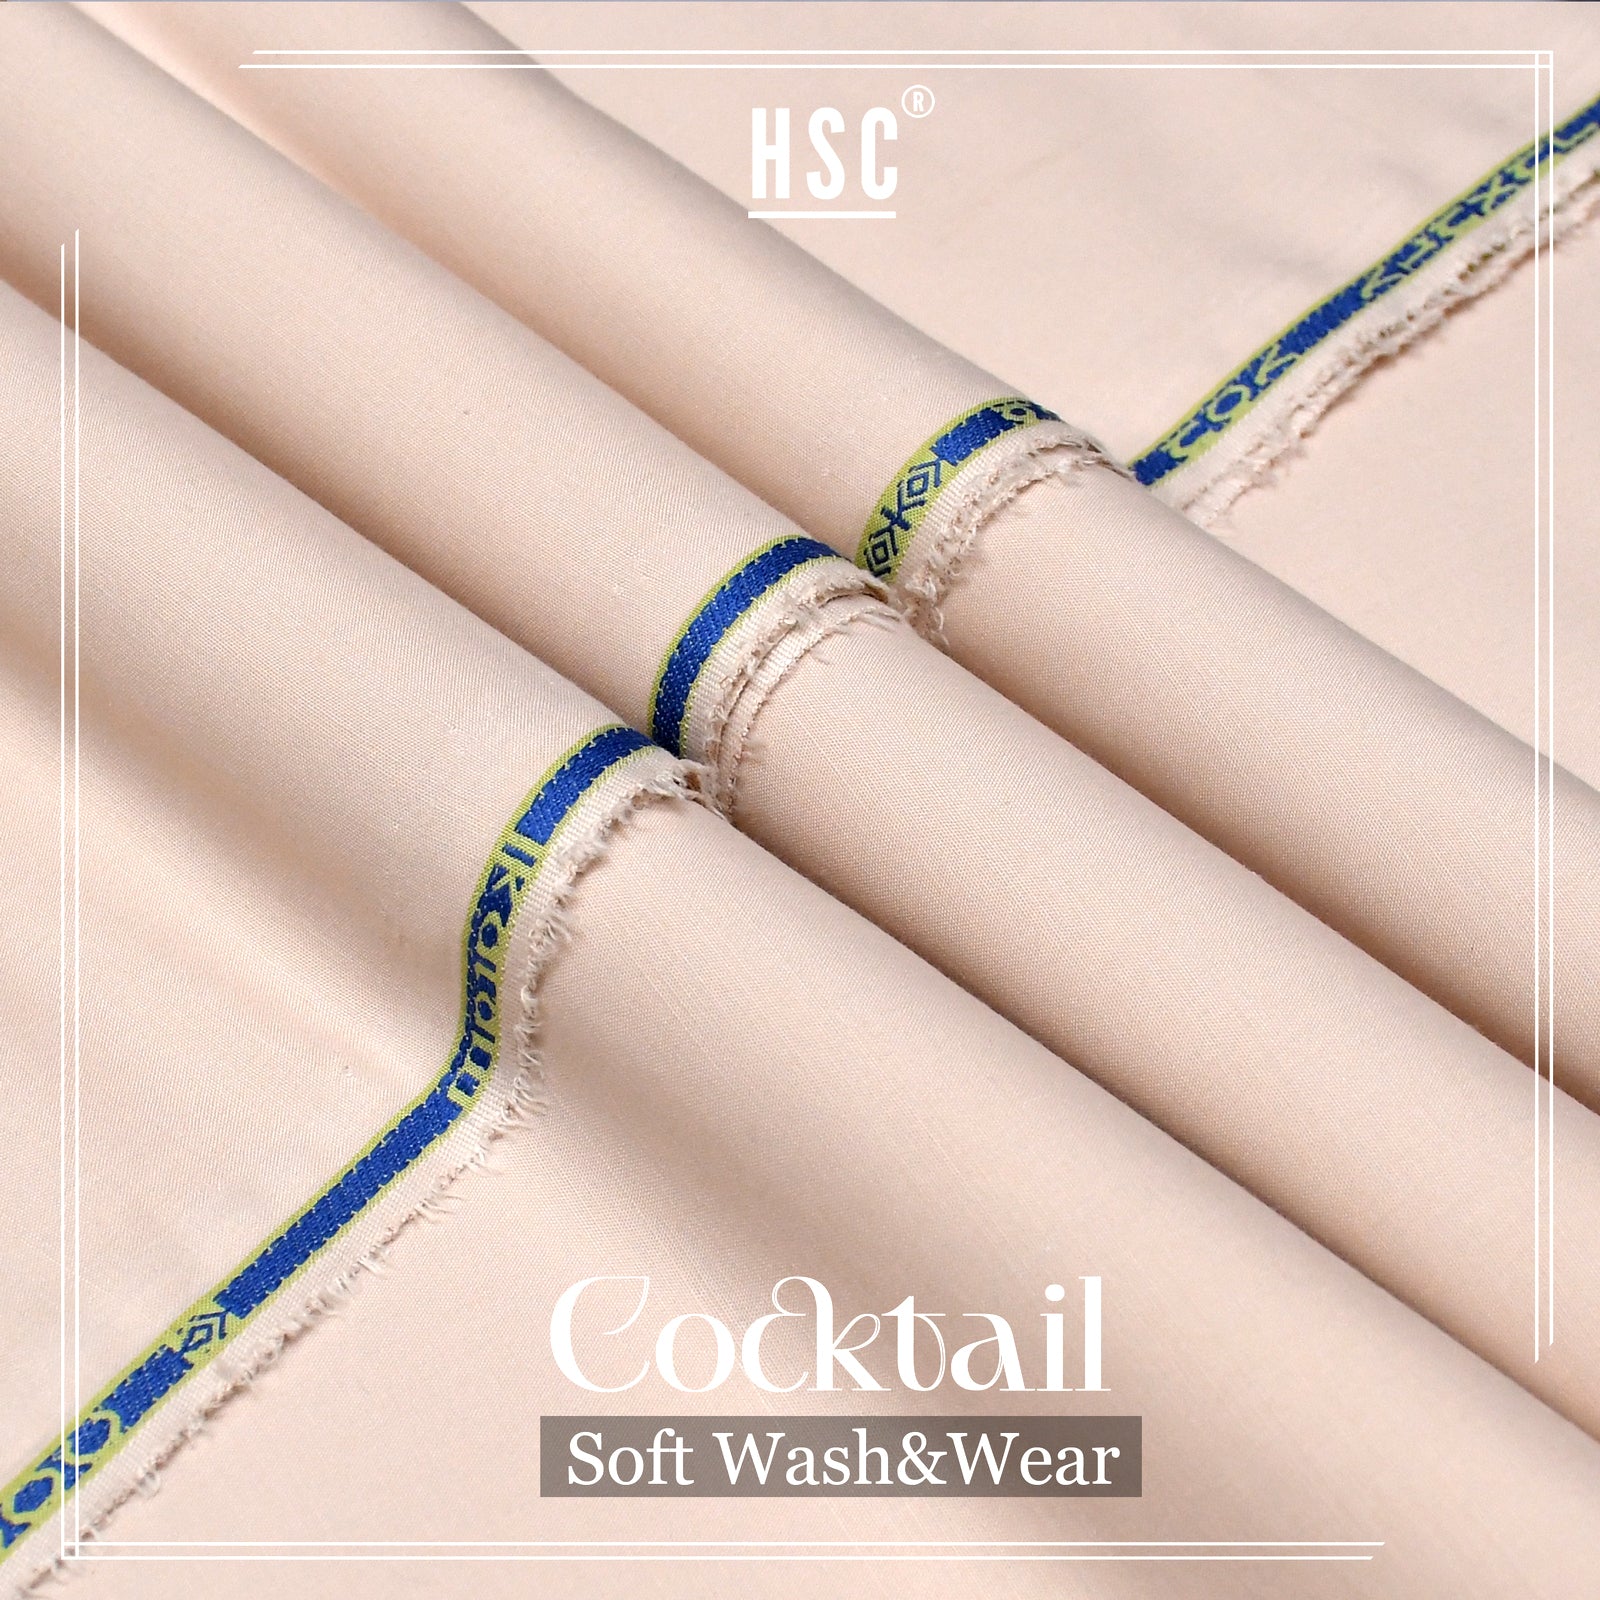 Buy 1 Get 1 Free Cocktail Soft Wash&Wear - CSW4 HSC BLENDED